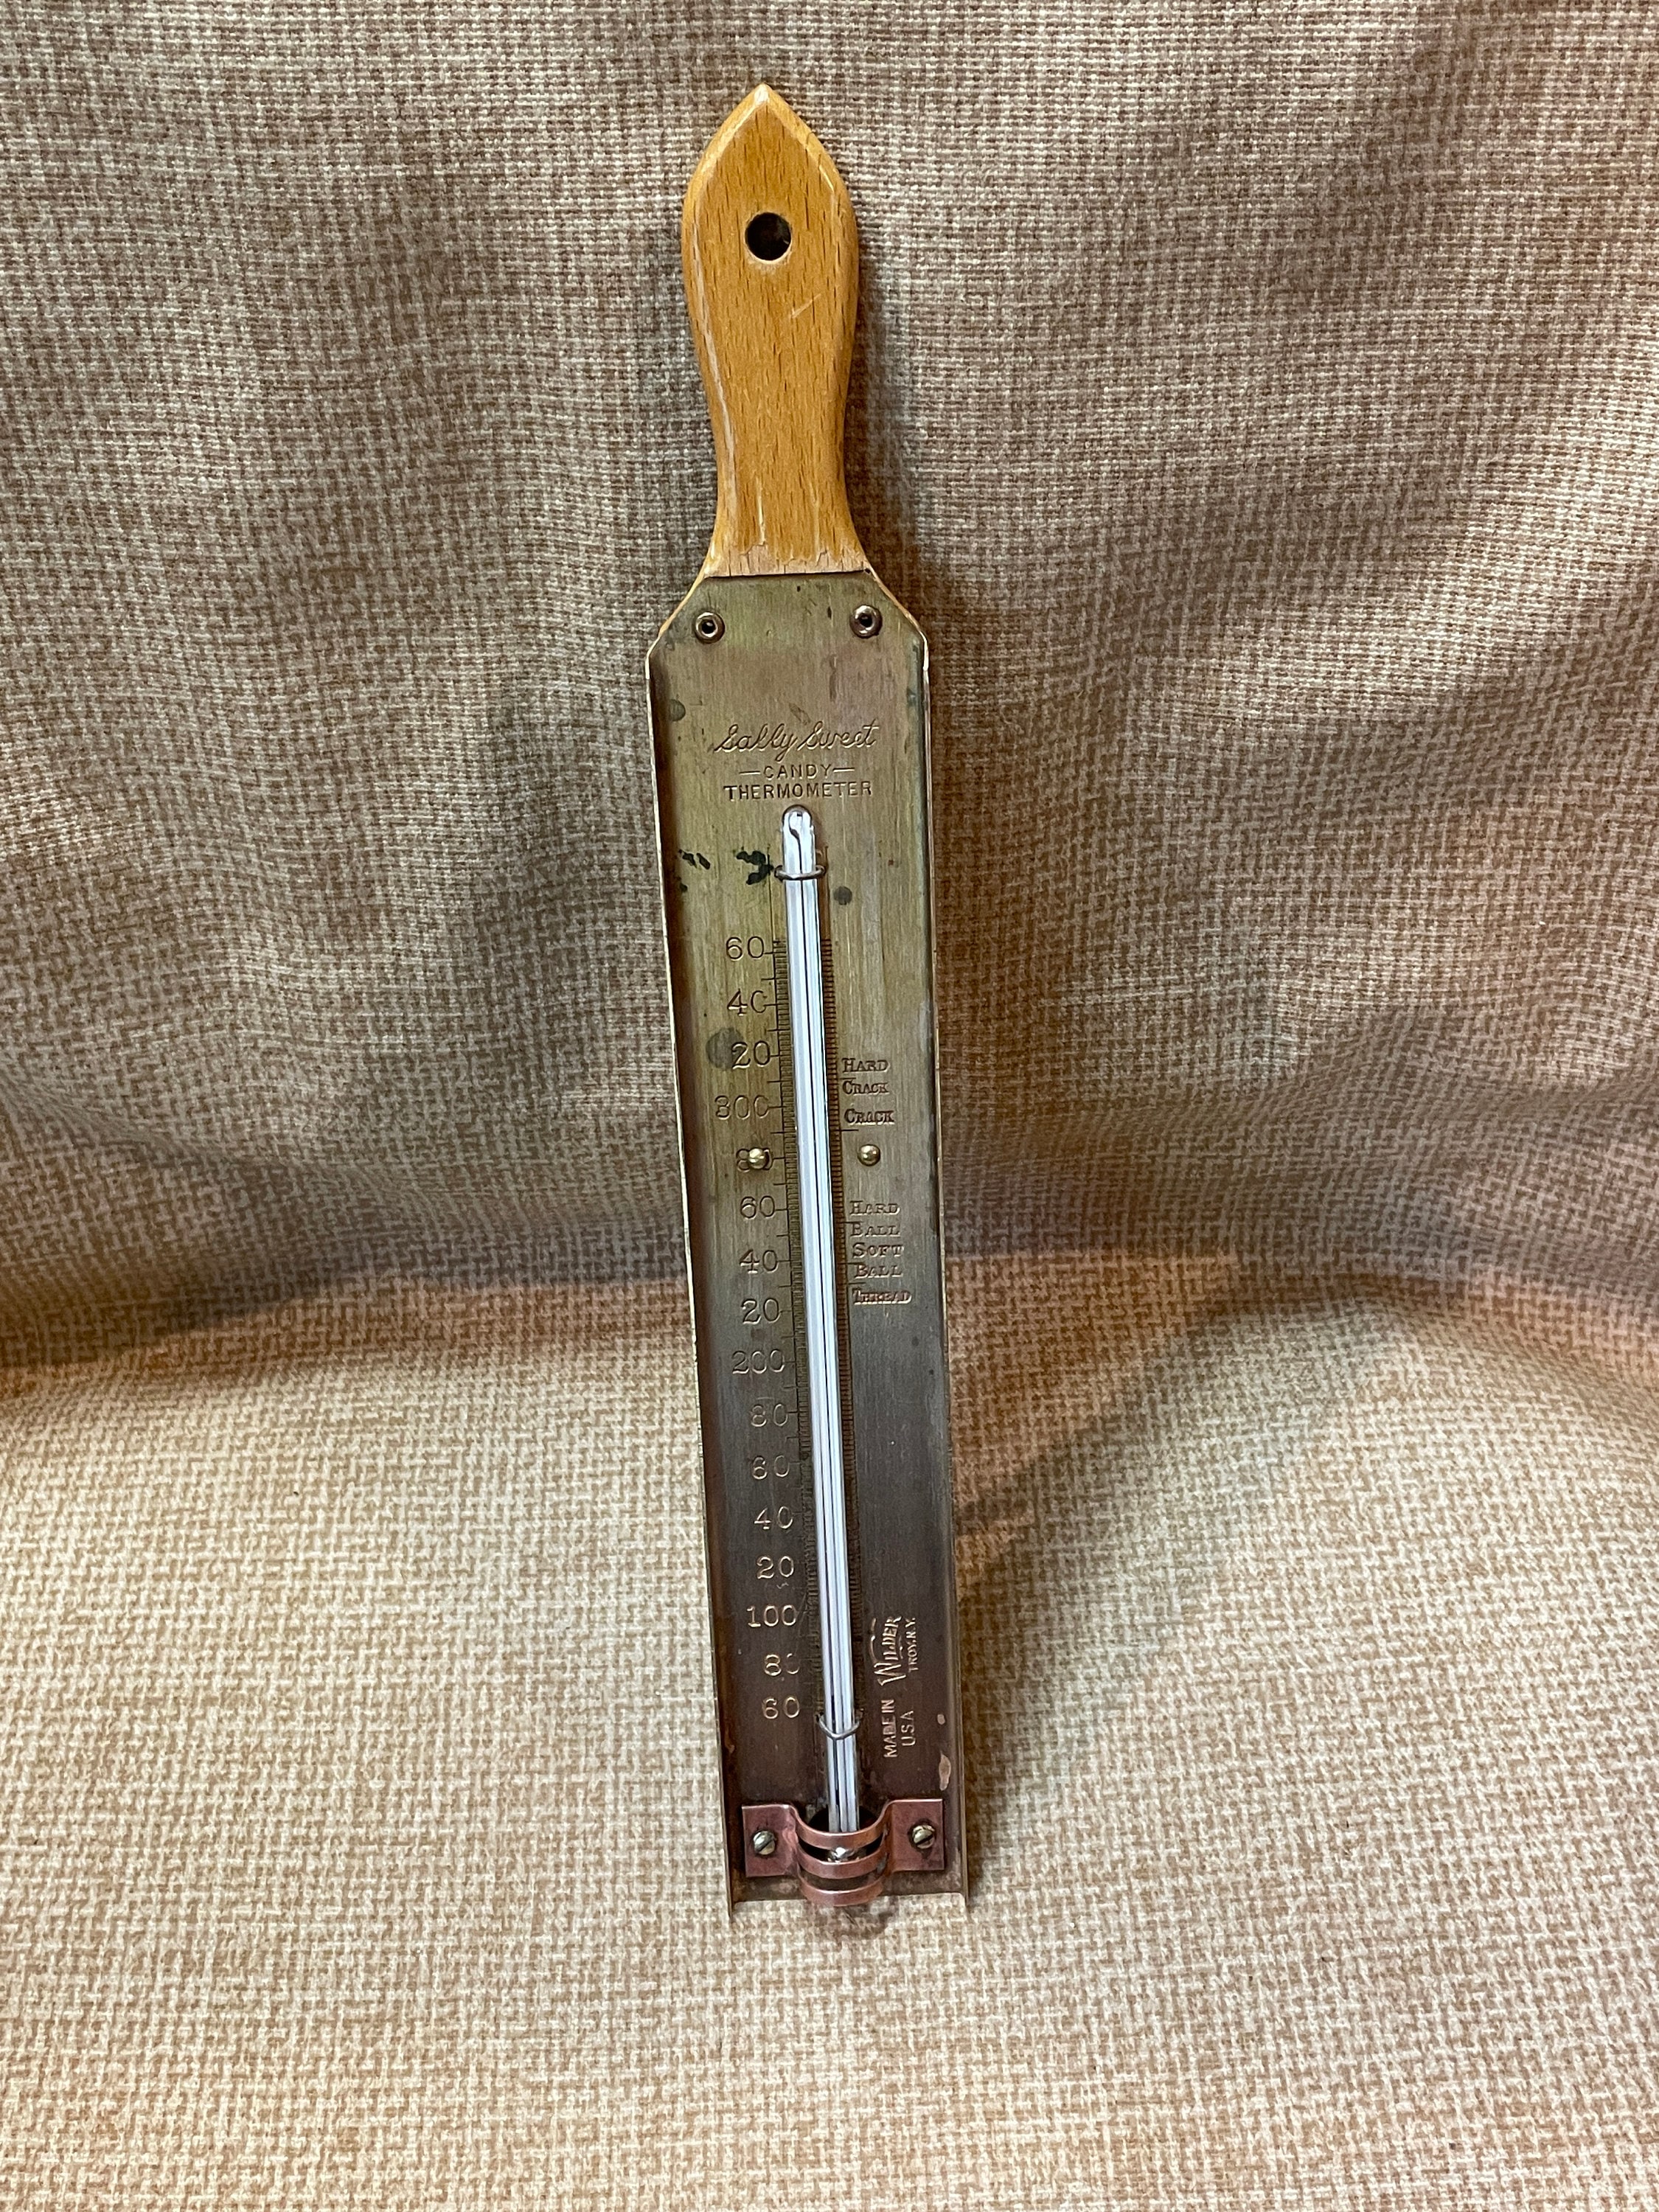 Vintage Taylor Candy Thermometer Turquoise Handle Candy Making